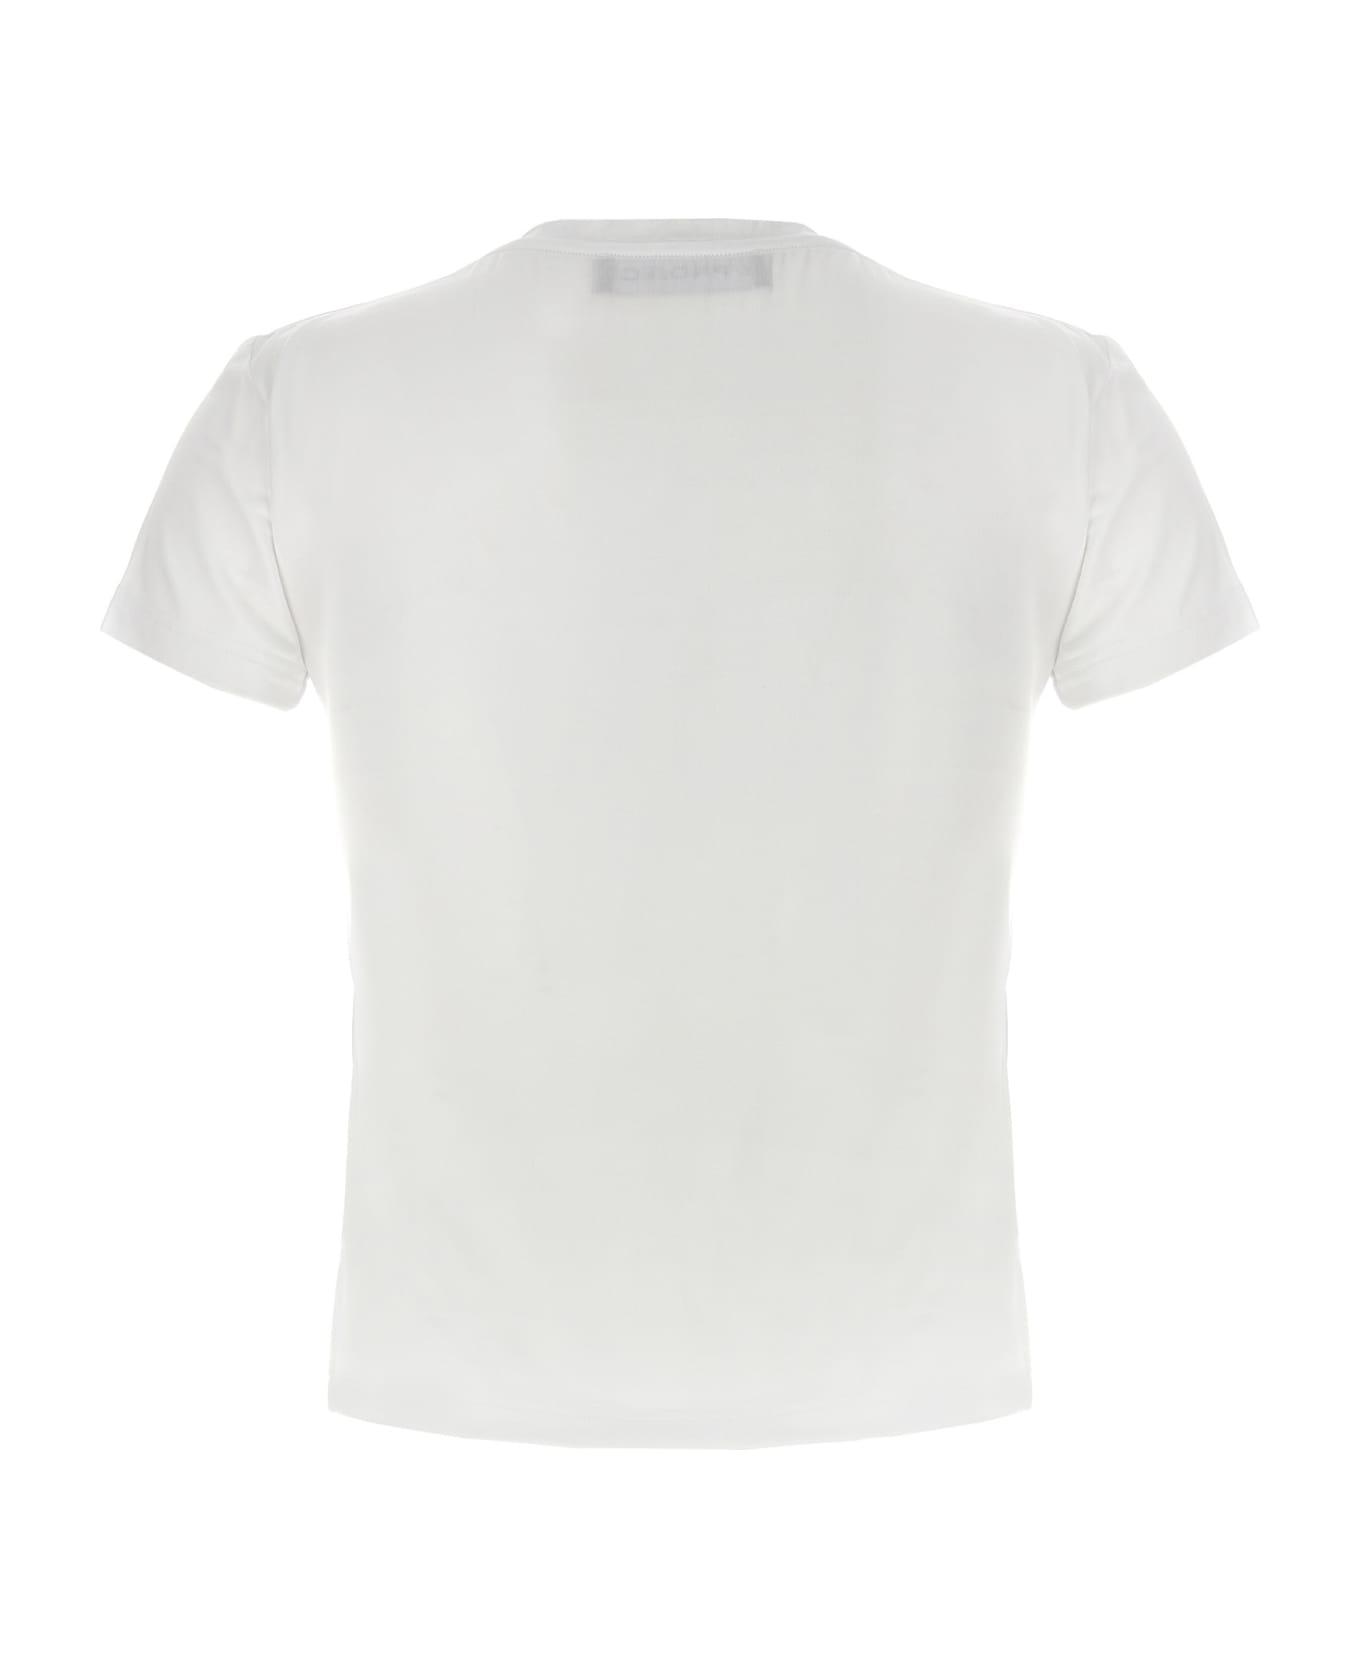 Y/Project 'y Baby Tee' T-shirt - White Tシャツ